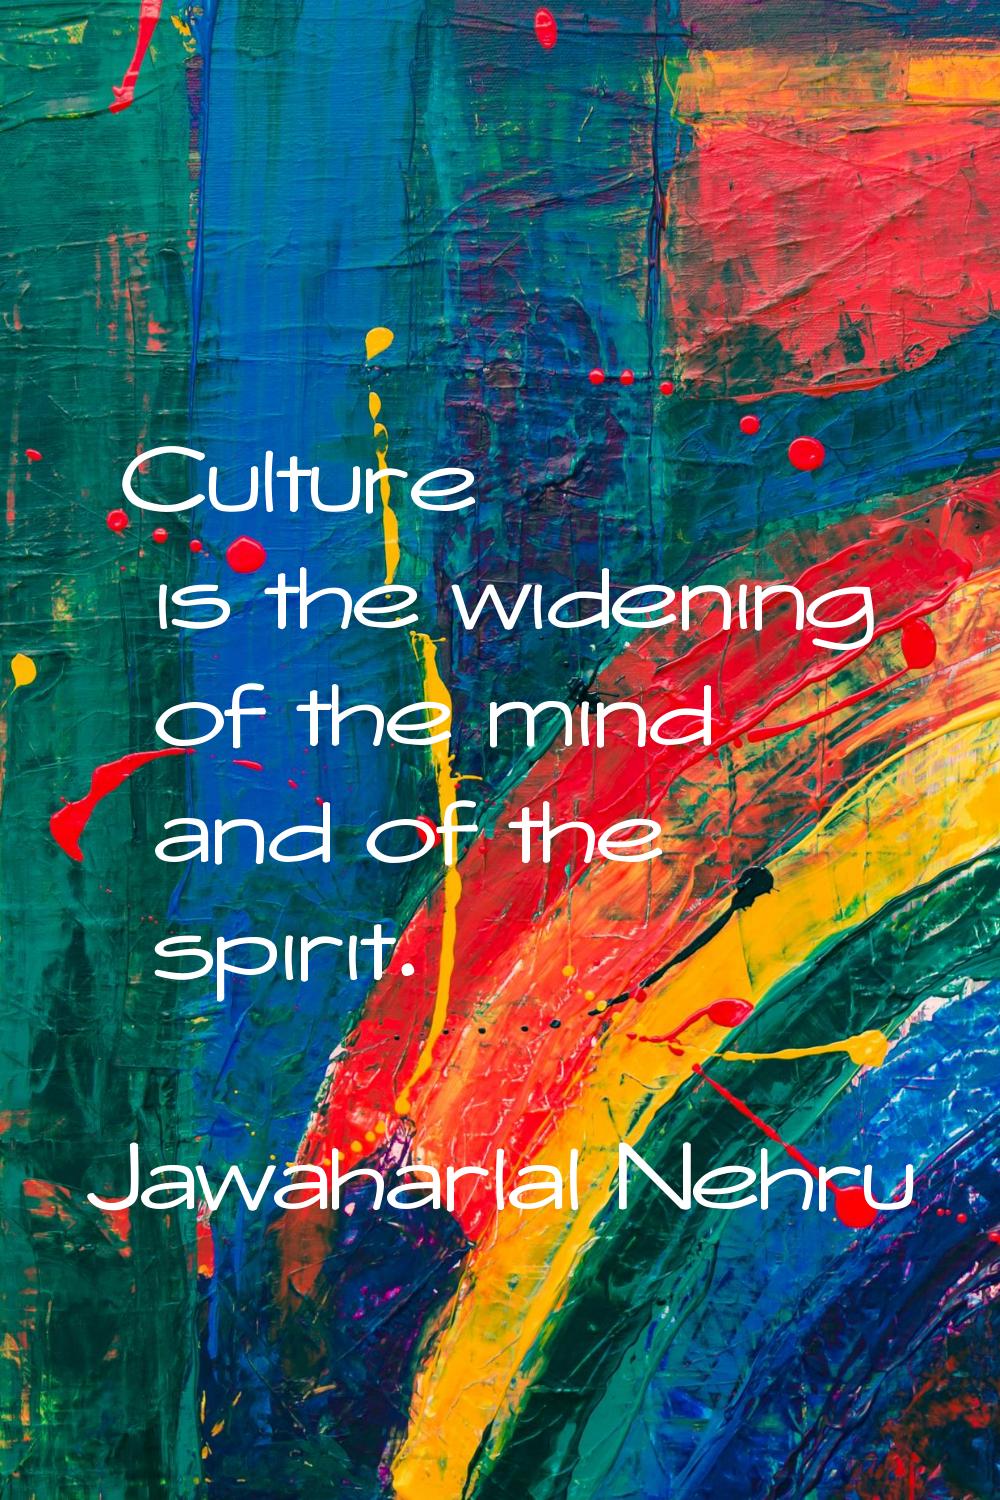 Culture is the widening of the mind and of the spirit.